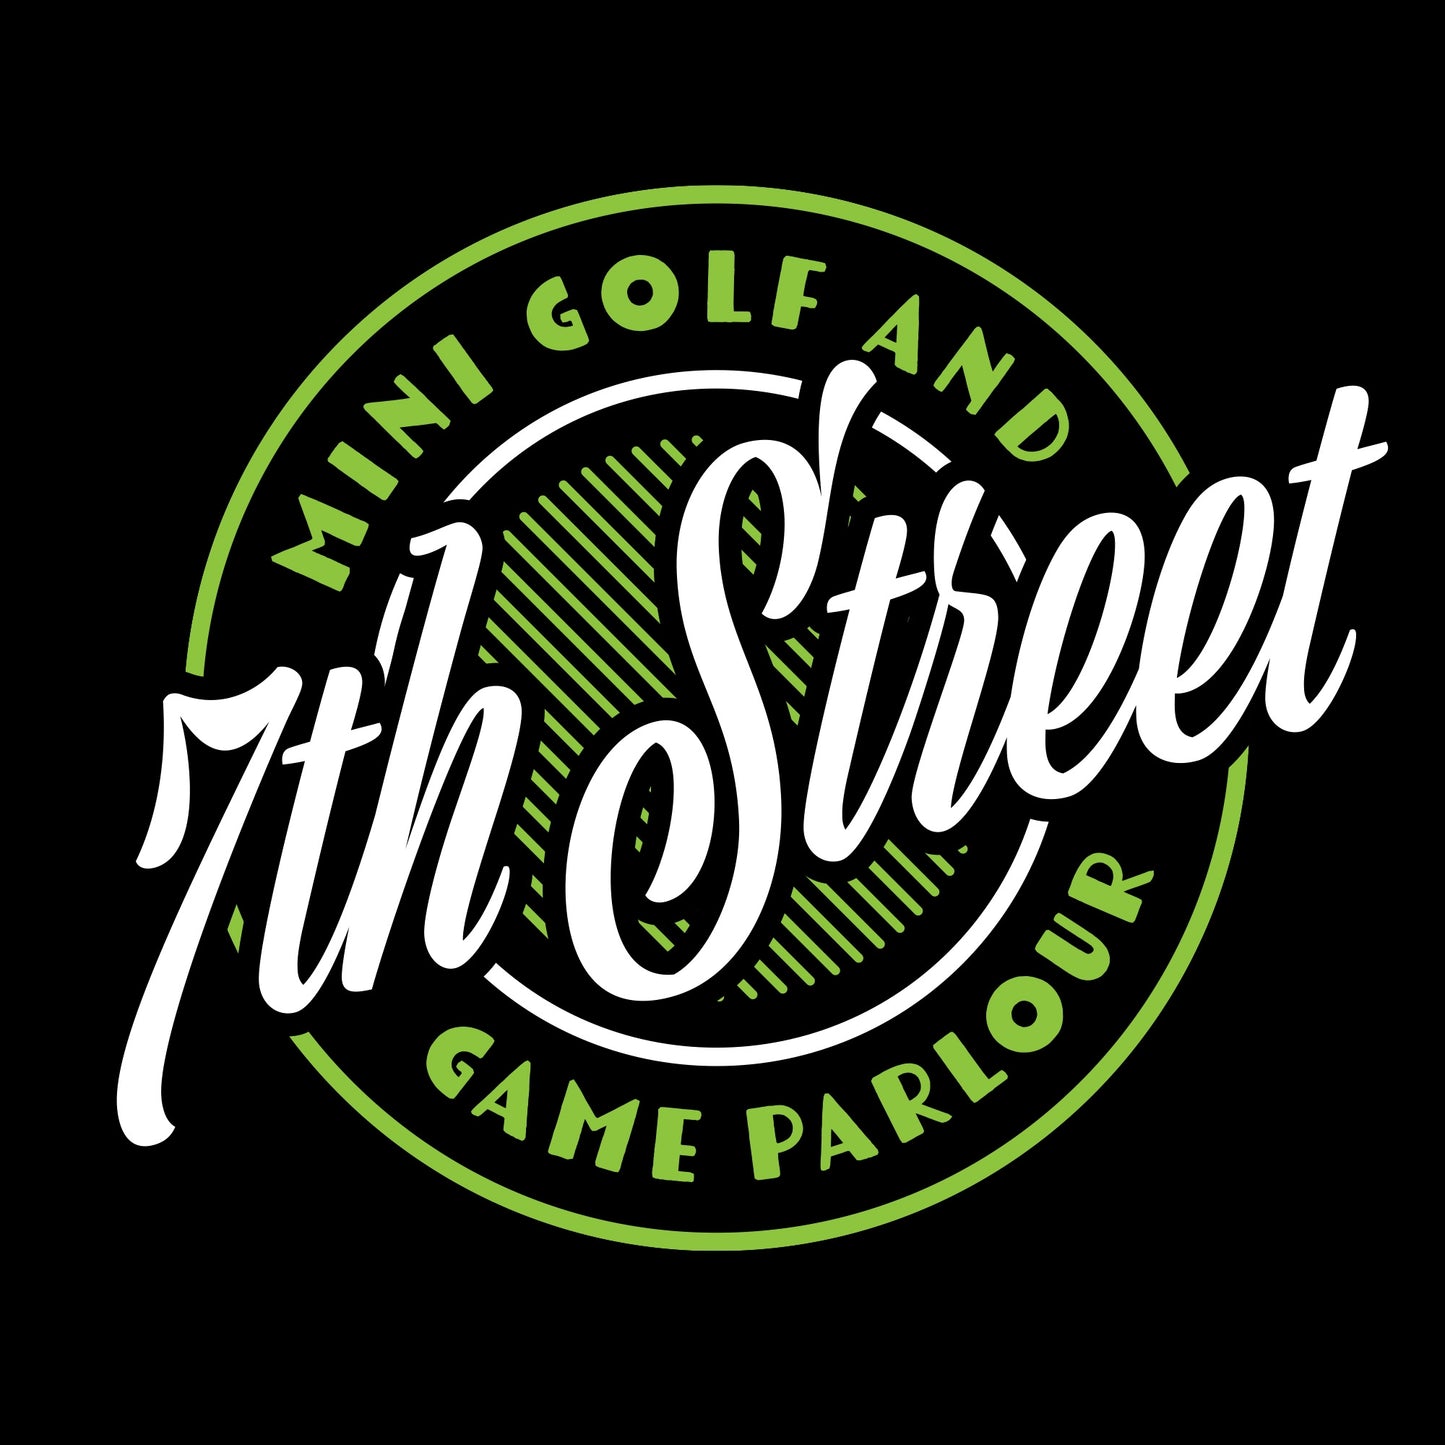 7th Street Mini Golf & Game Parlor's Christmas in July Craft Event